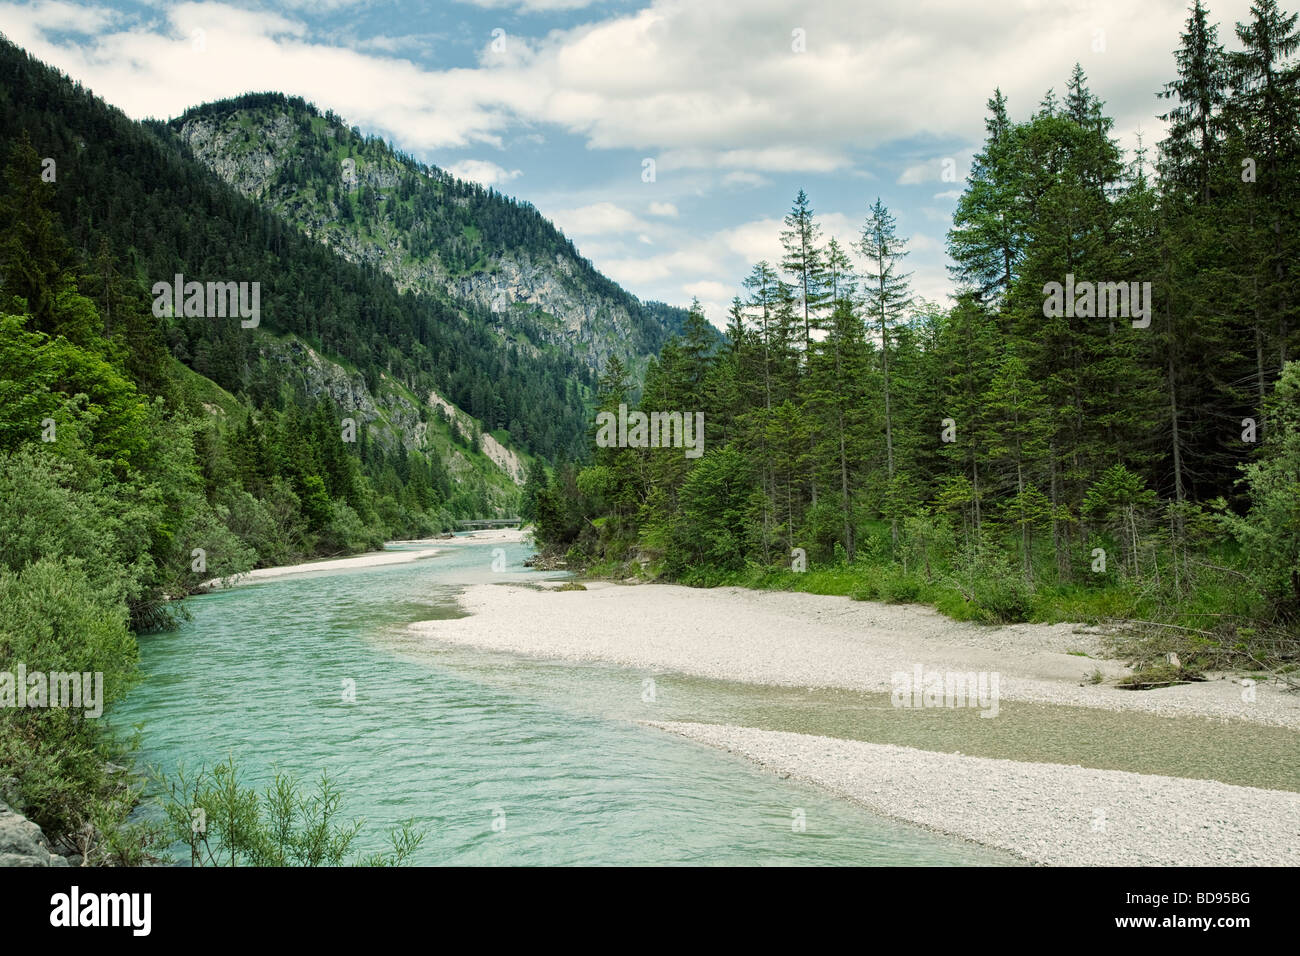 Germany, Bavaria - River Isar and Germany landscape in the Bavarian Alps Stock Photo